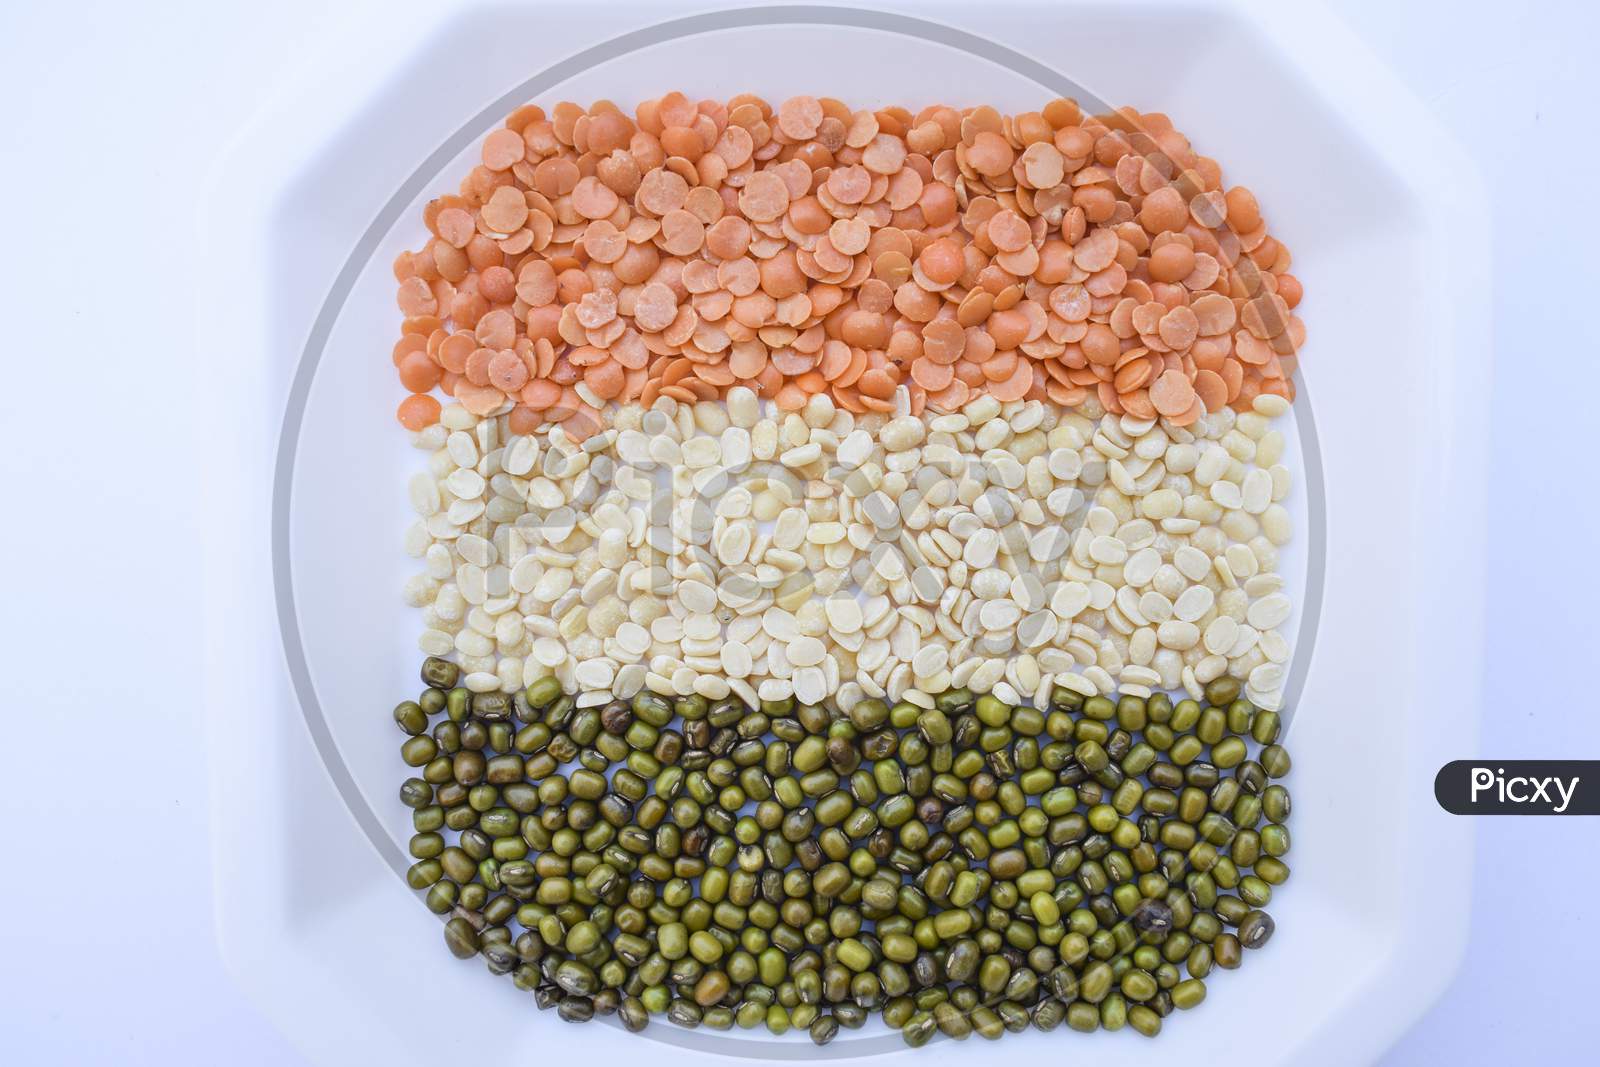 Happy Republic Day, Indian Republic Day Themed Tricolor Indian Flag Colors Saffron, White And Green. Indian Flag Themed Food, Indian Cuisine Dals, Pulses Lentils Arranged